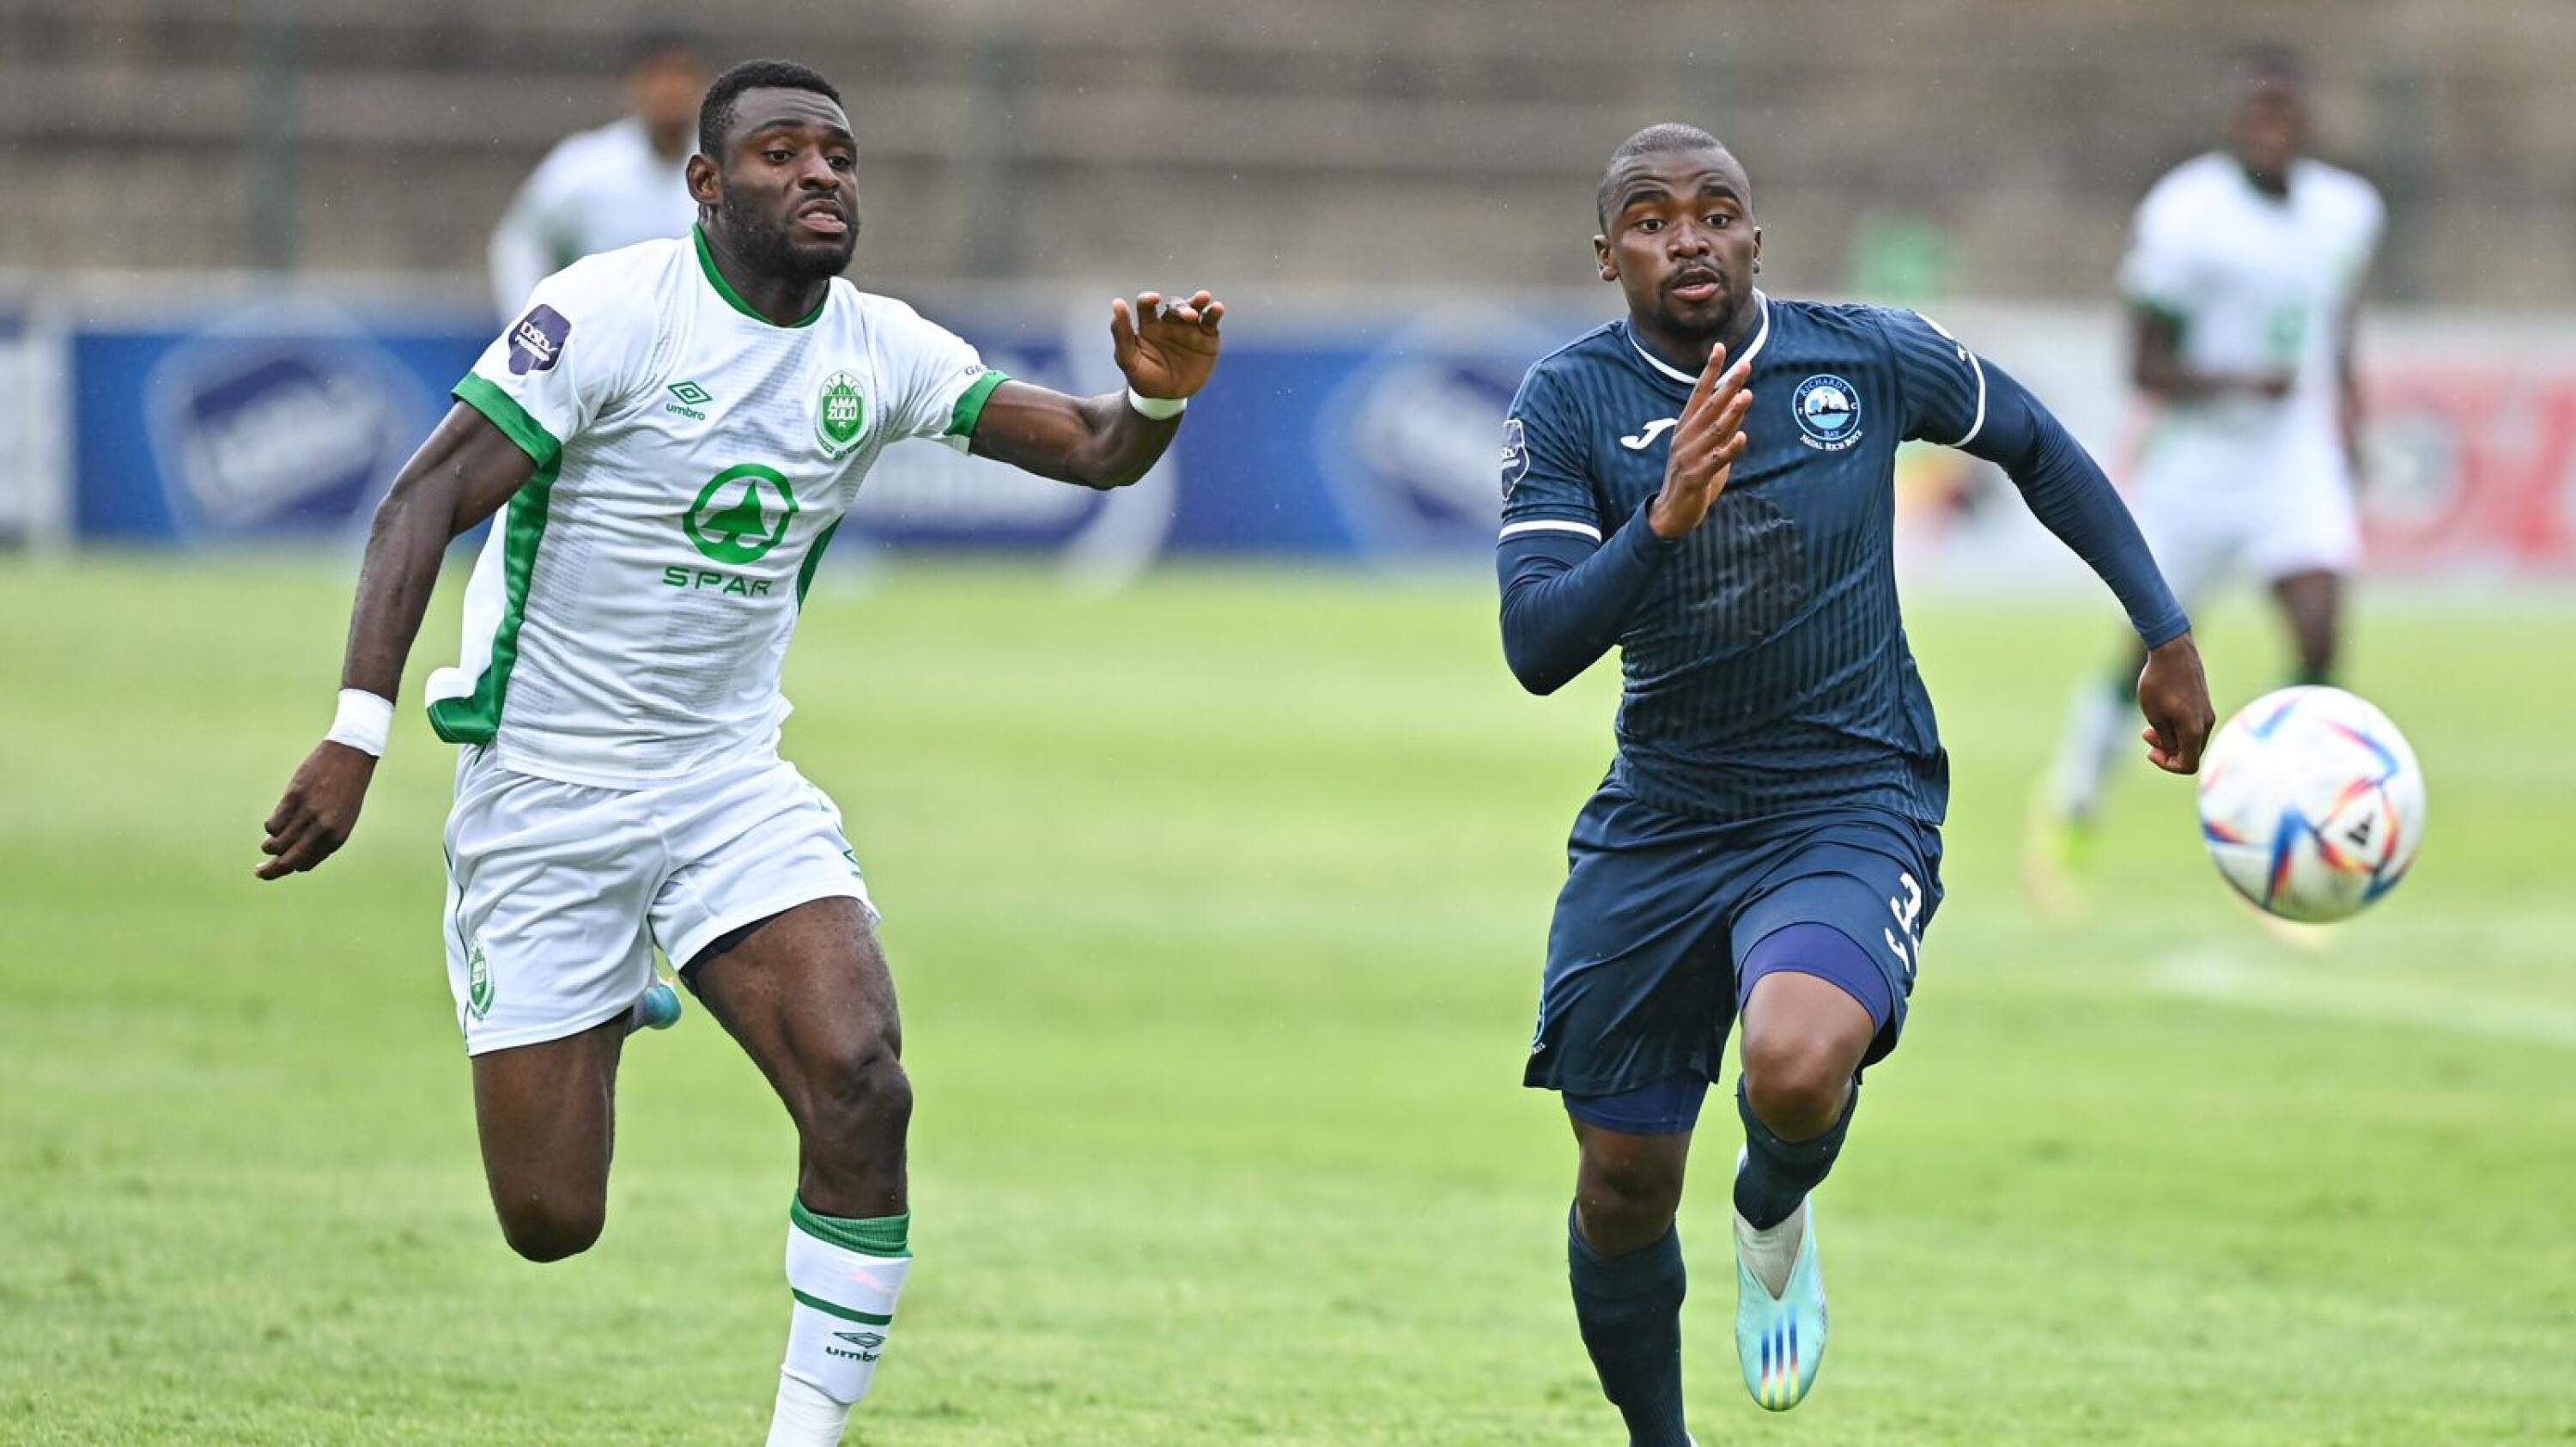 Junior Dion of AmaZulu FC fights Khetha Shabalala of Richards Bay FC for the ball during their DStv Premiership clash at King Goodwill Zwelithini Stadium in Durban on Sunday